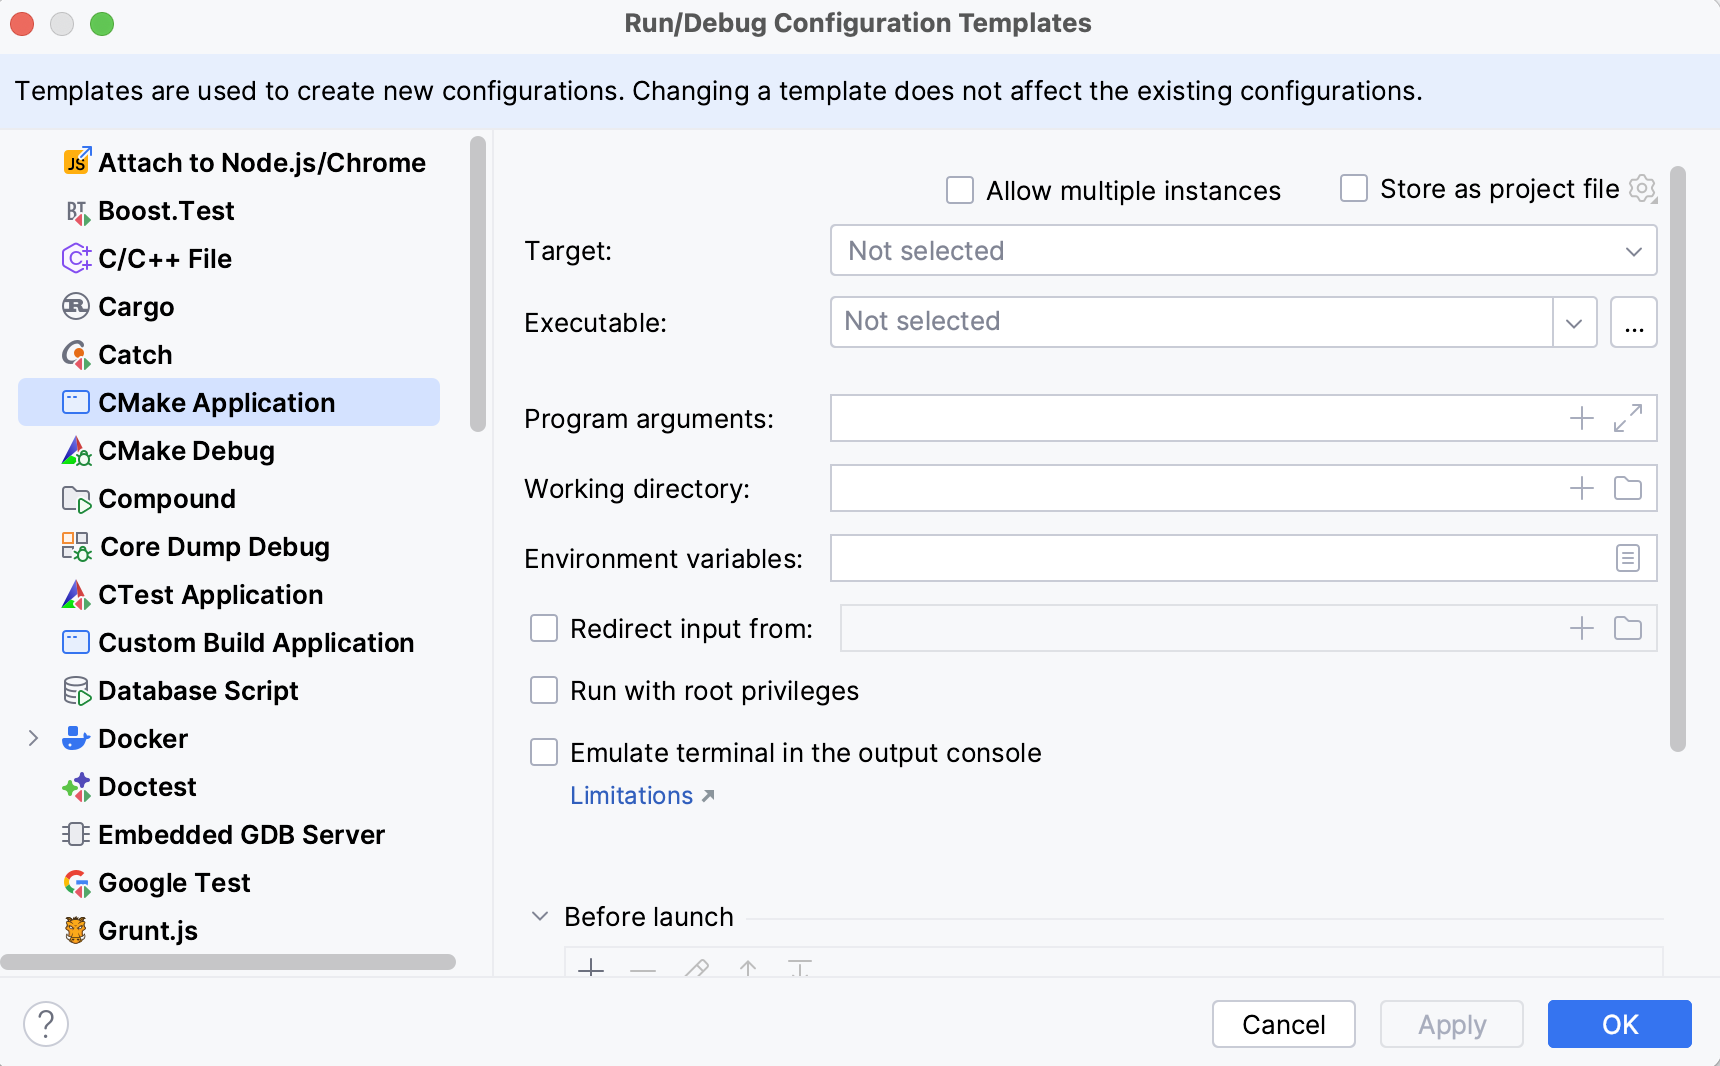 Editing a configuration template